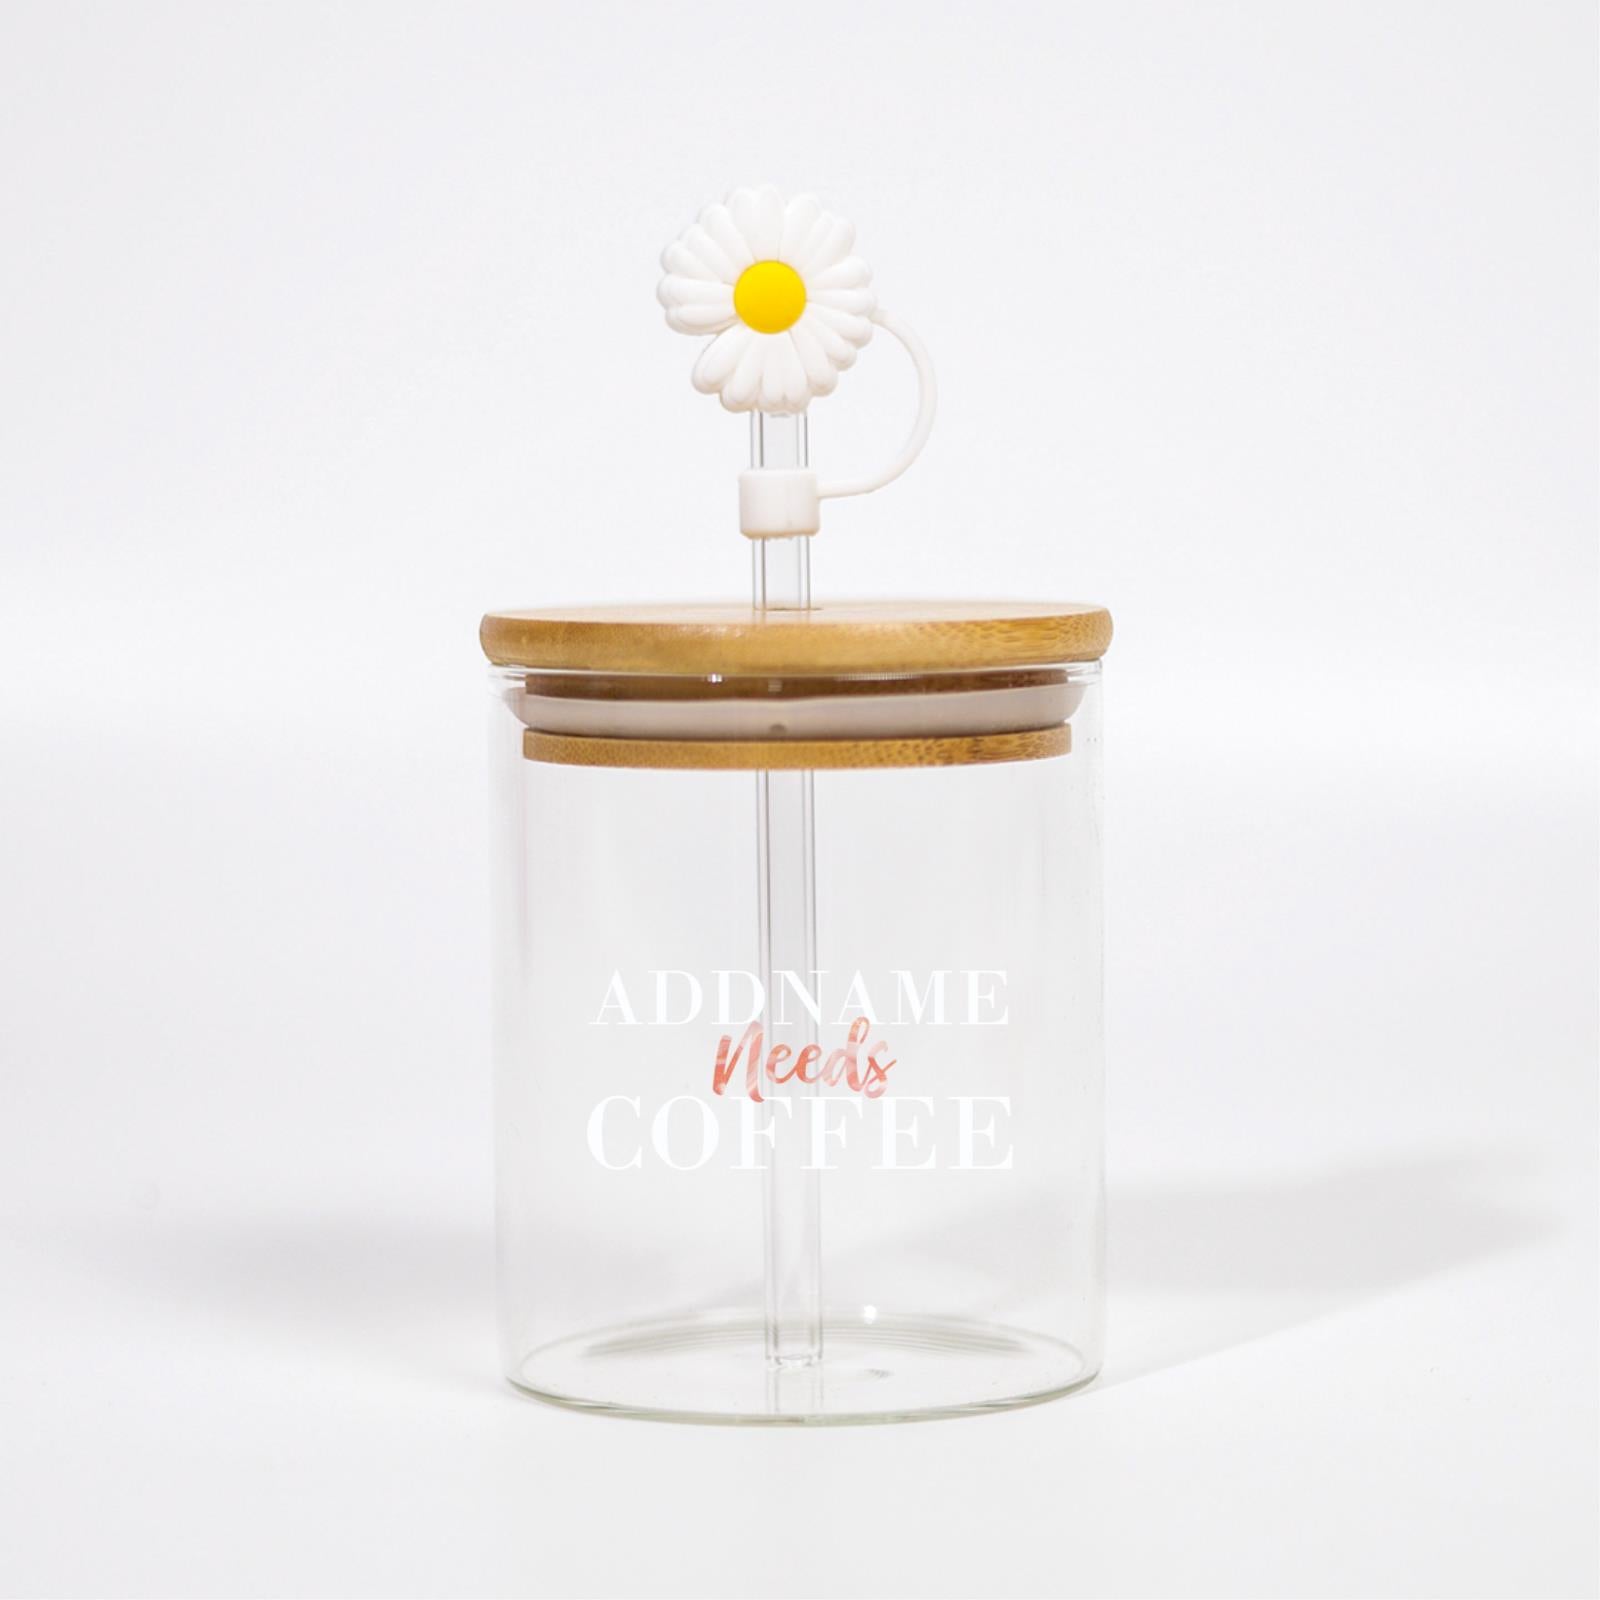 Marble Addname Need Coffee Canicup - Rose With White Text